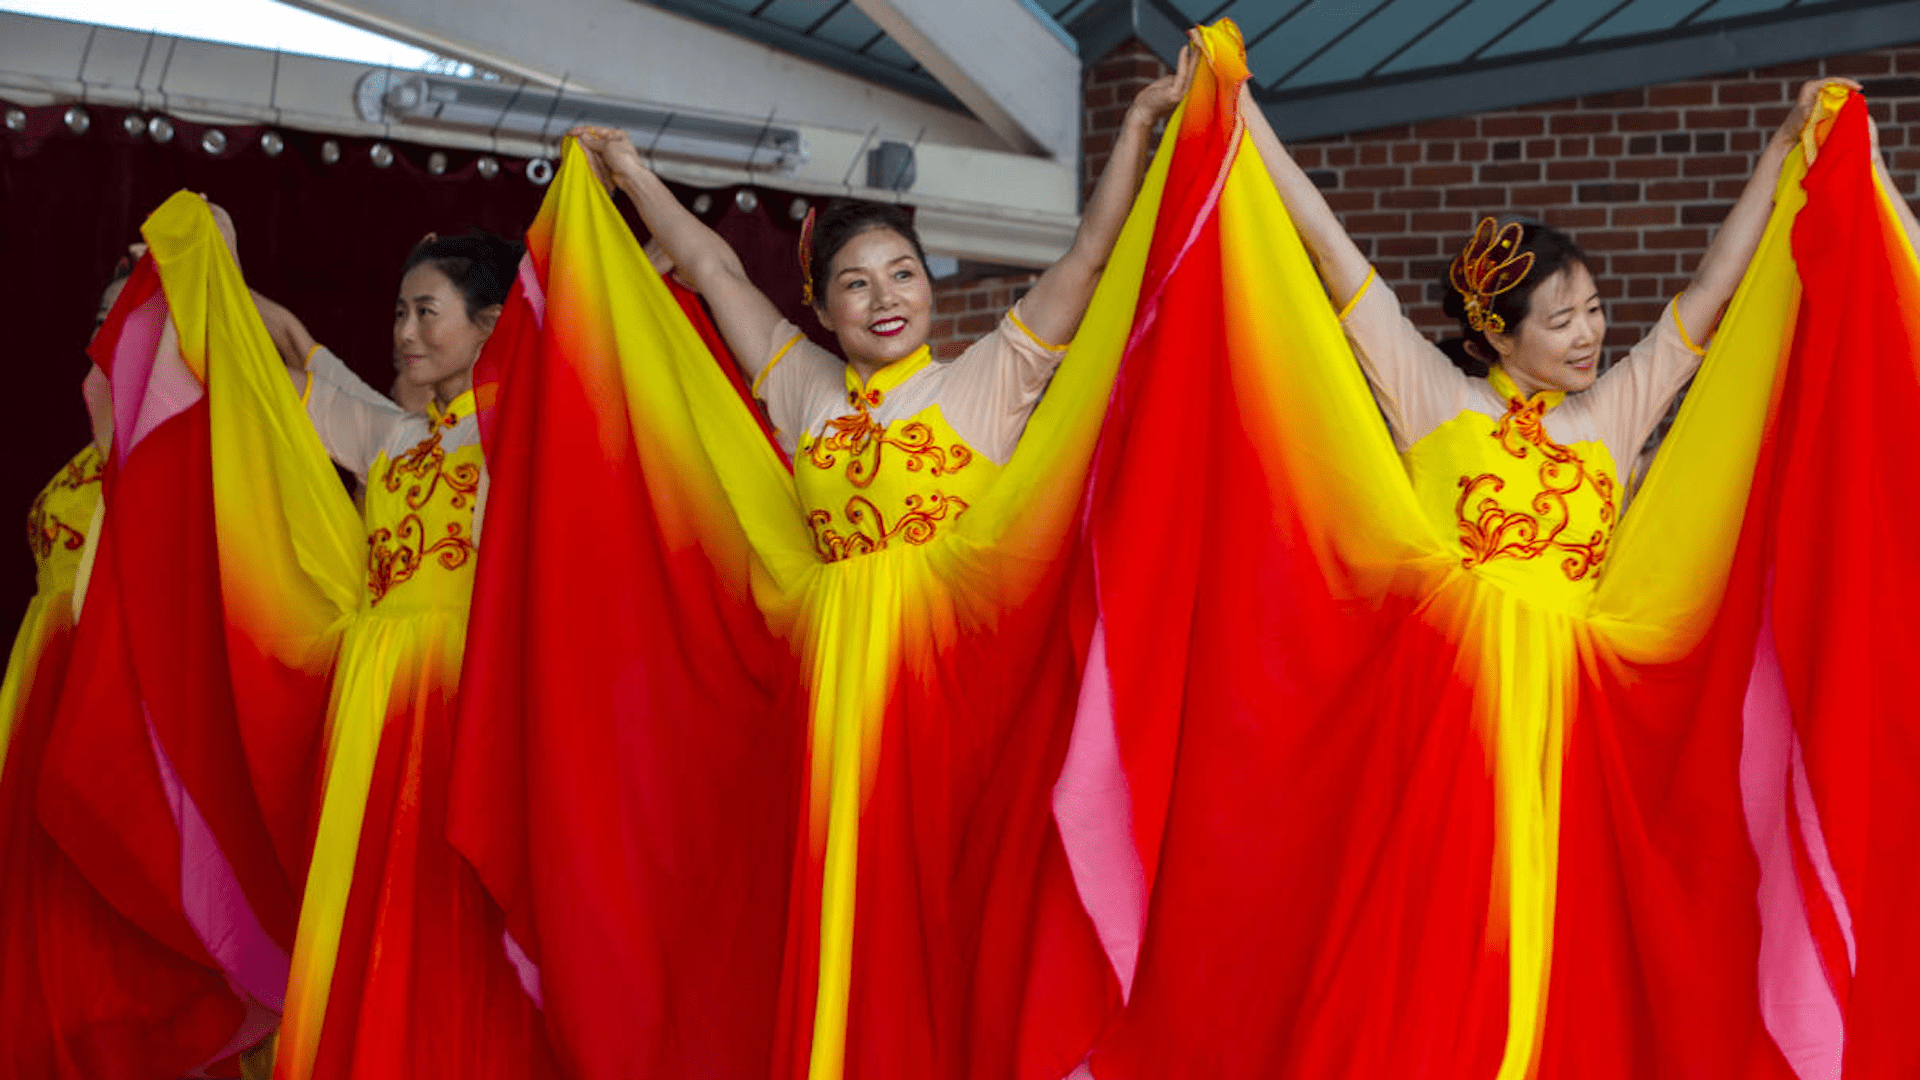 Tampa hosts Asian Pacific Islander Cultural Festival That's So Tampa